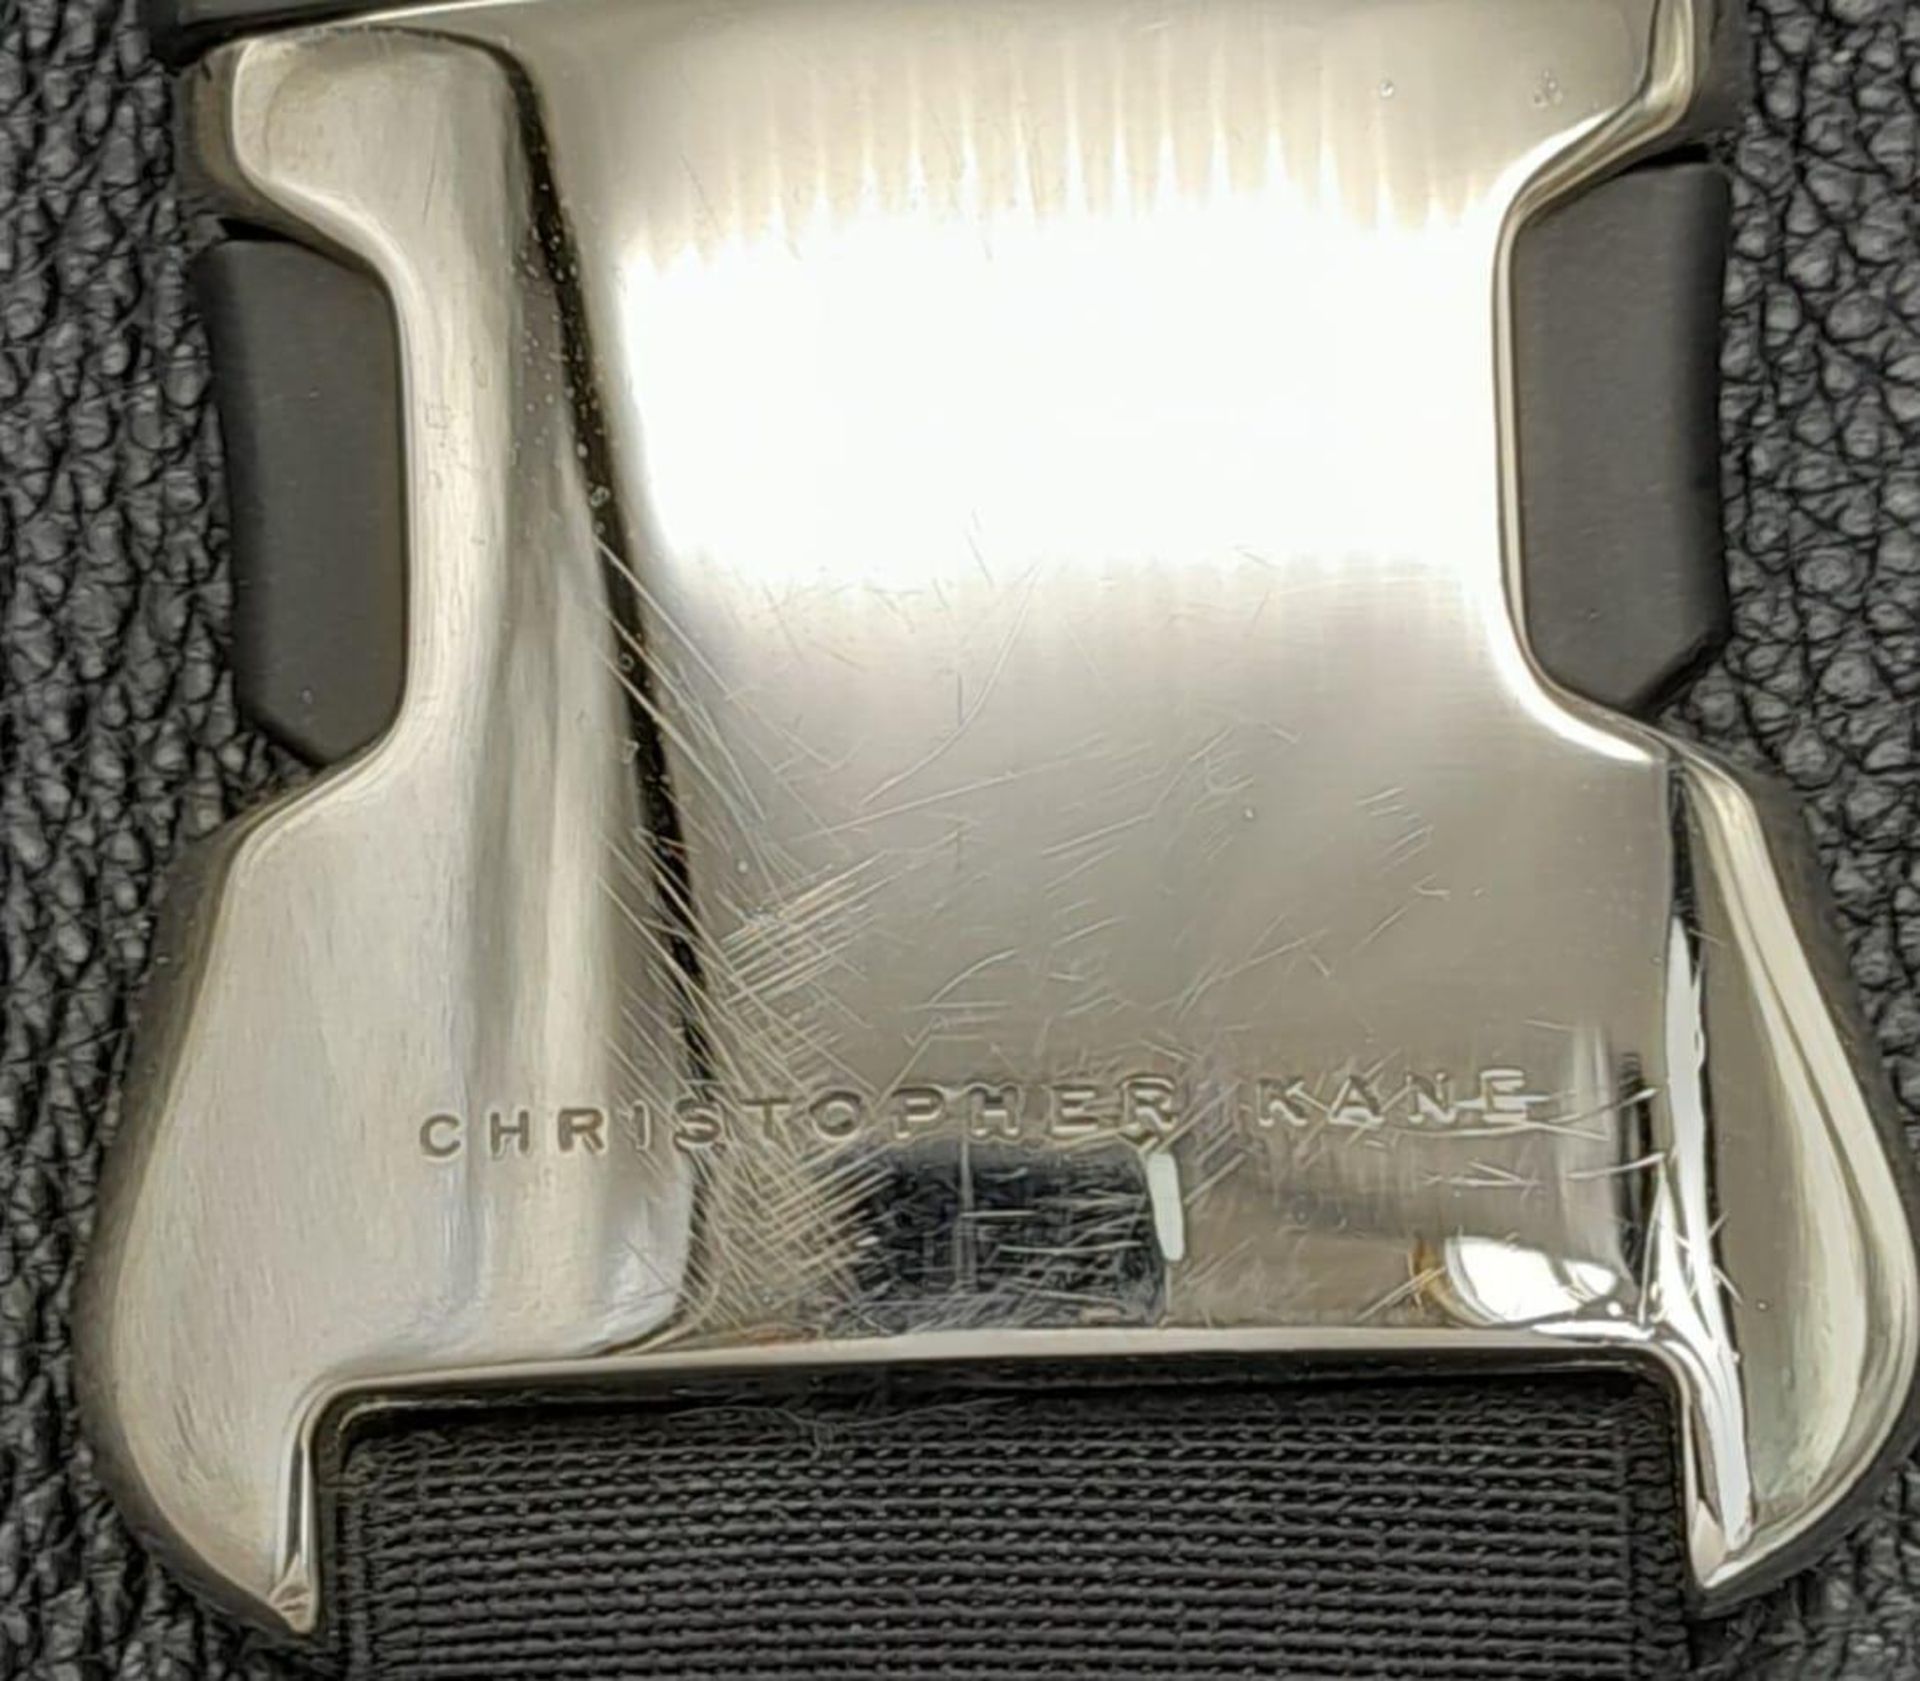 A Christopher Kane Black Tote Bag. Leather exterior with silver-toned hardware, two top handles, - Image 7 of 7